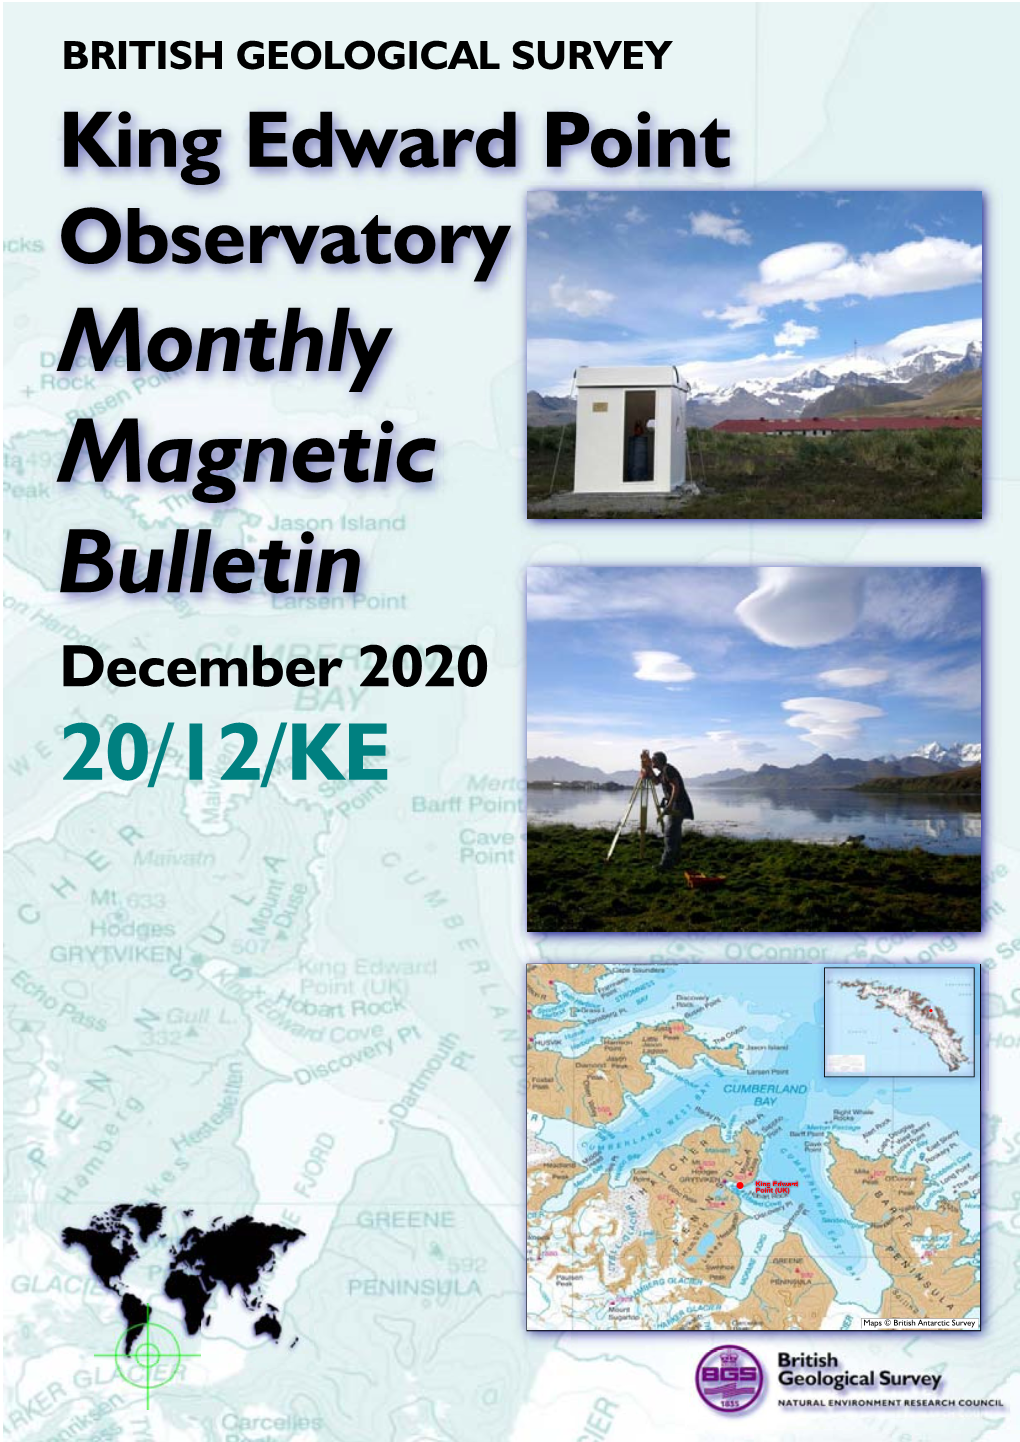 King Edward Point Observatory Monthly Magnetic Bulletin